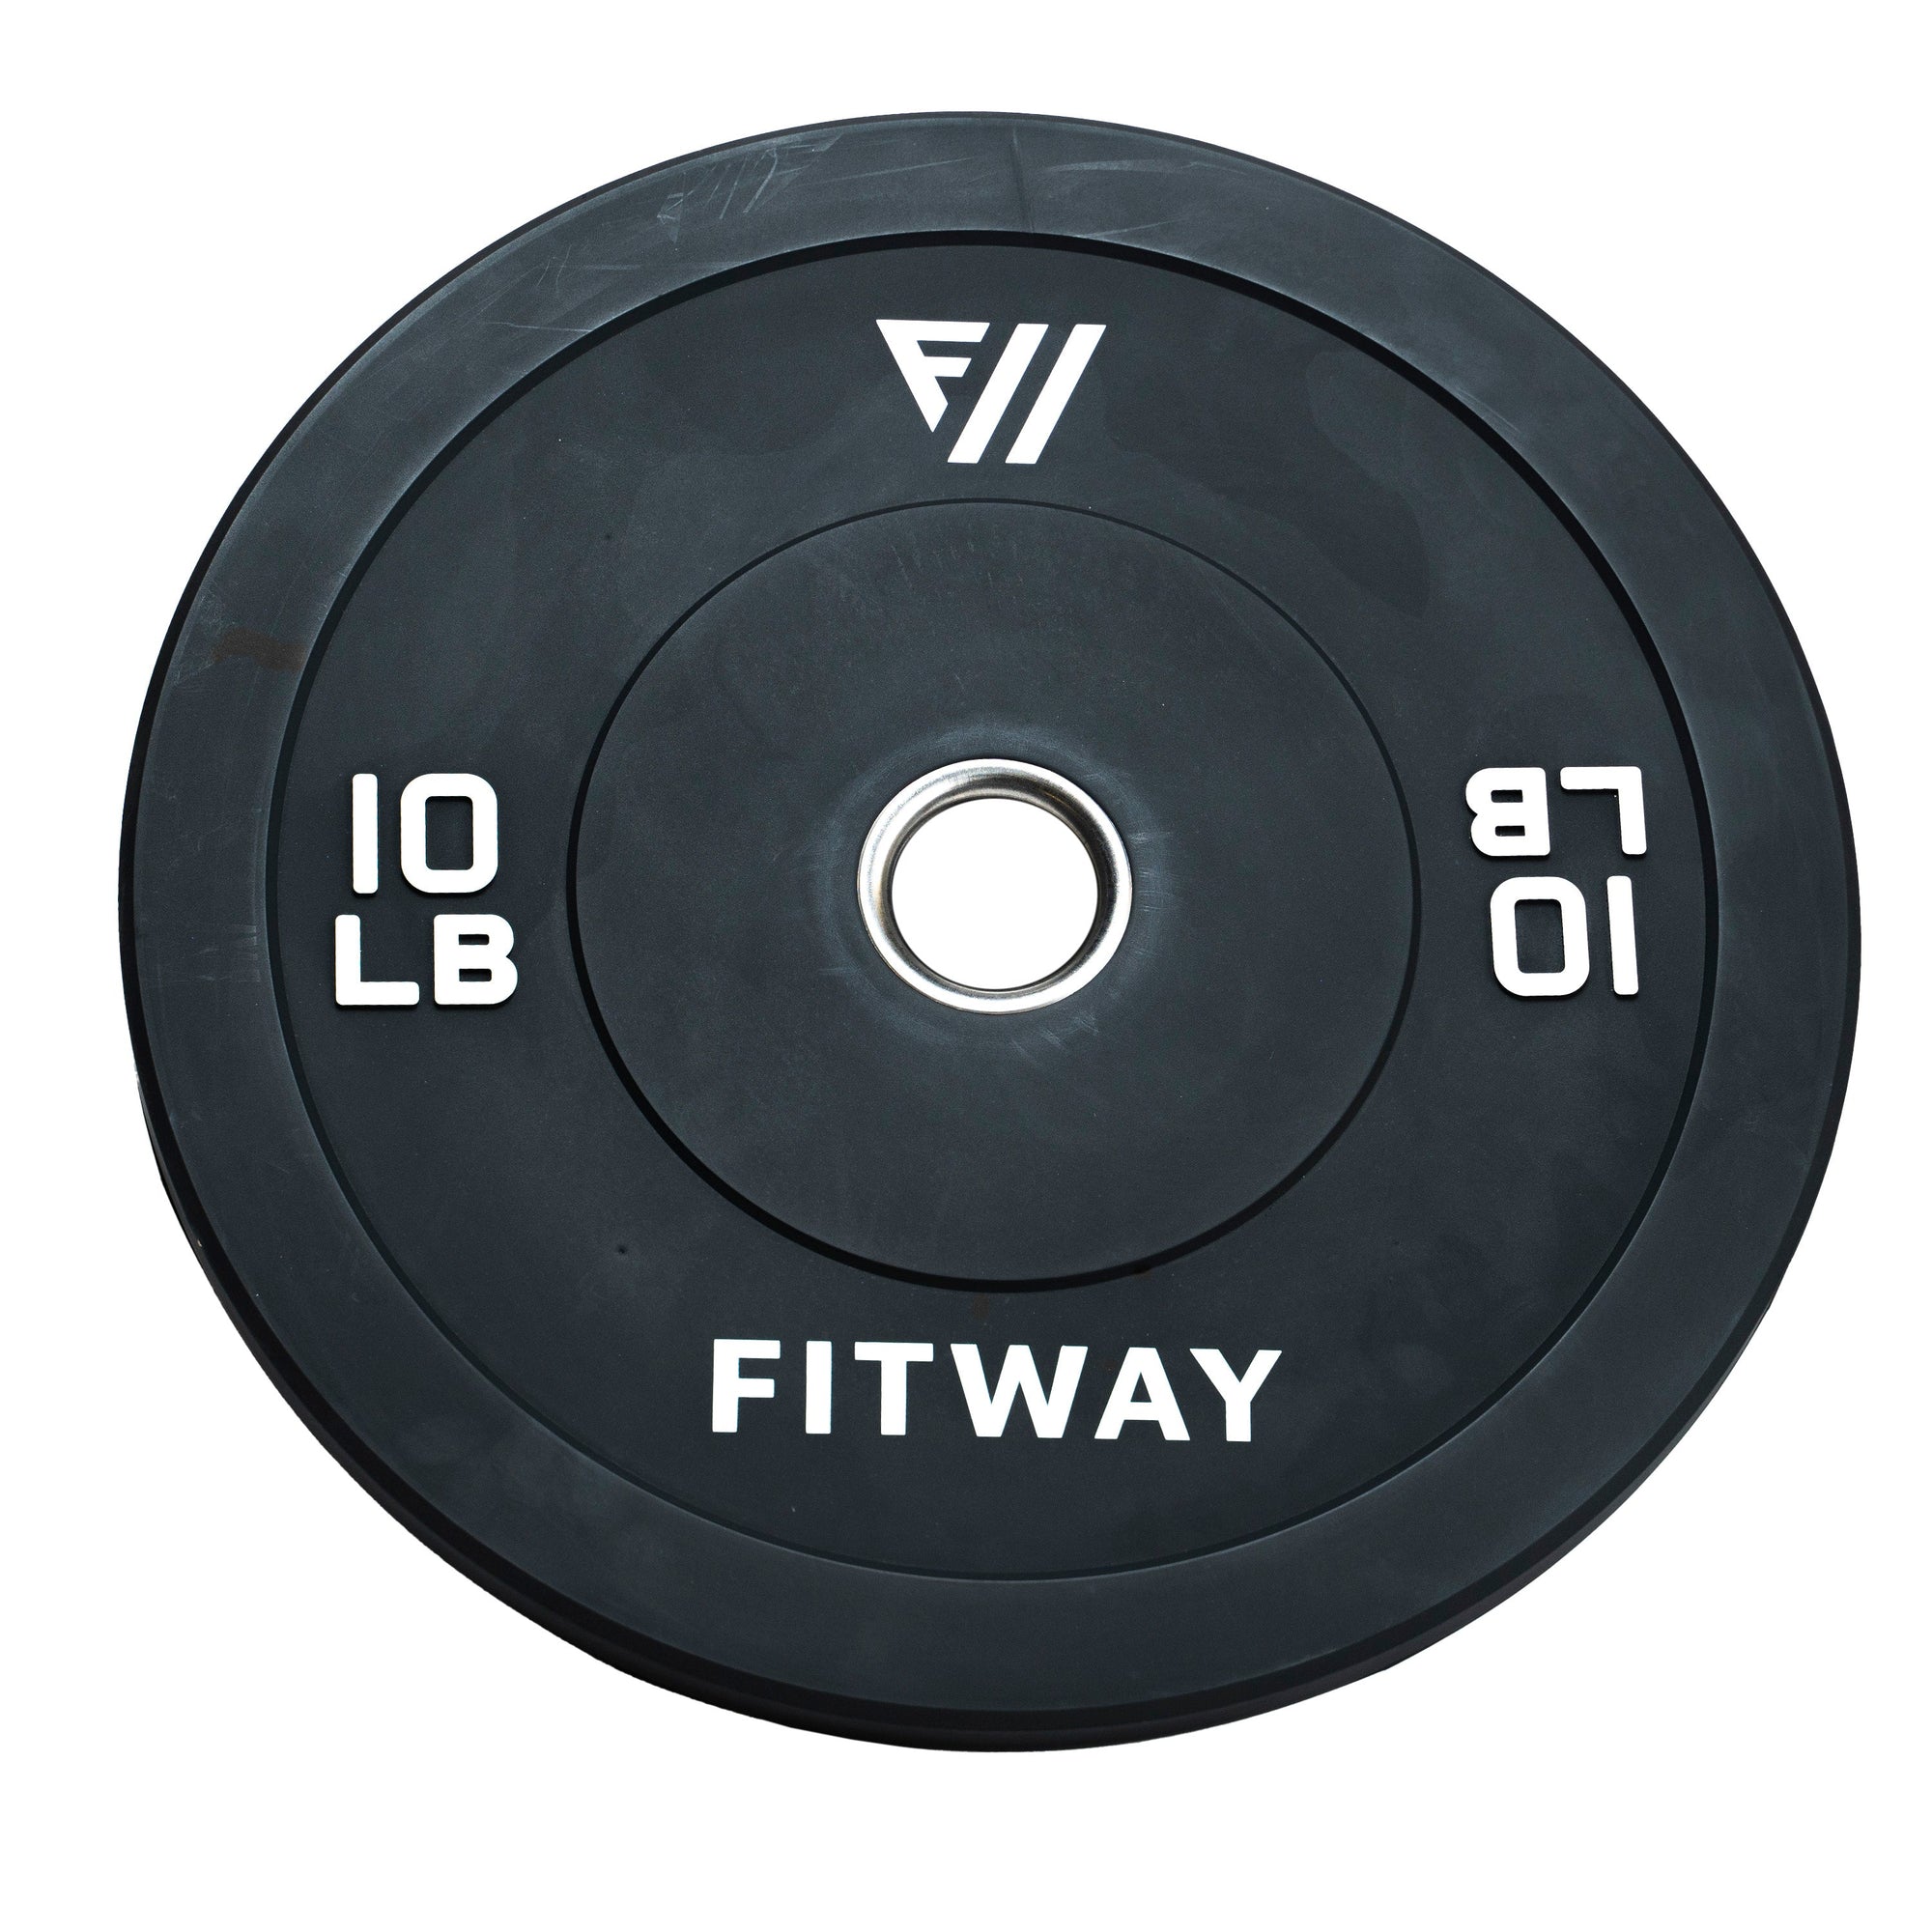 FitWay Equip. 10lb Olympic Rubber Bumper Plate